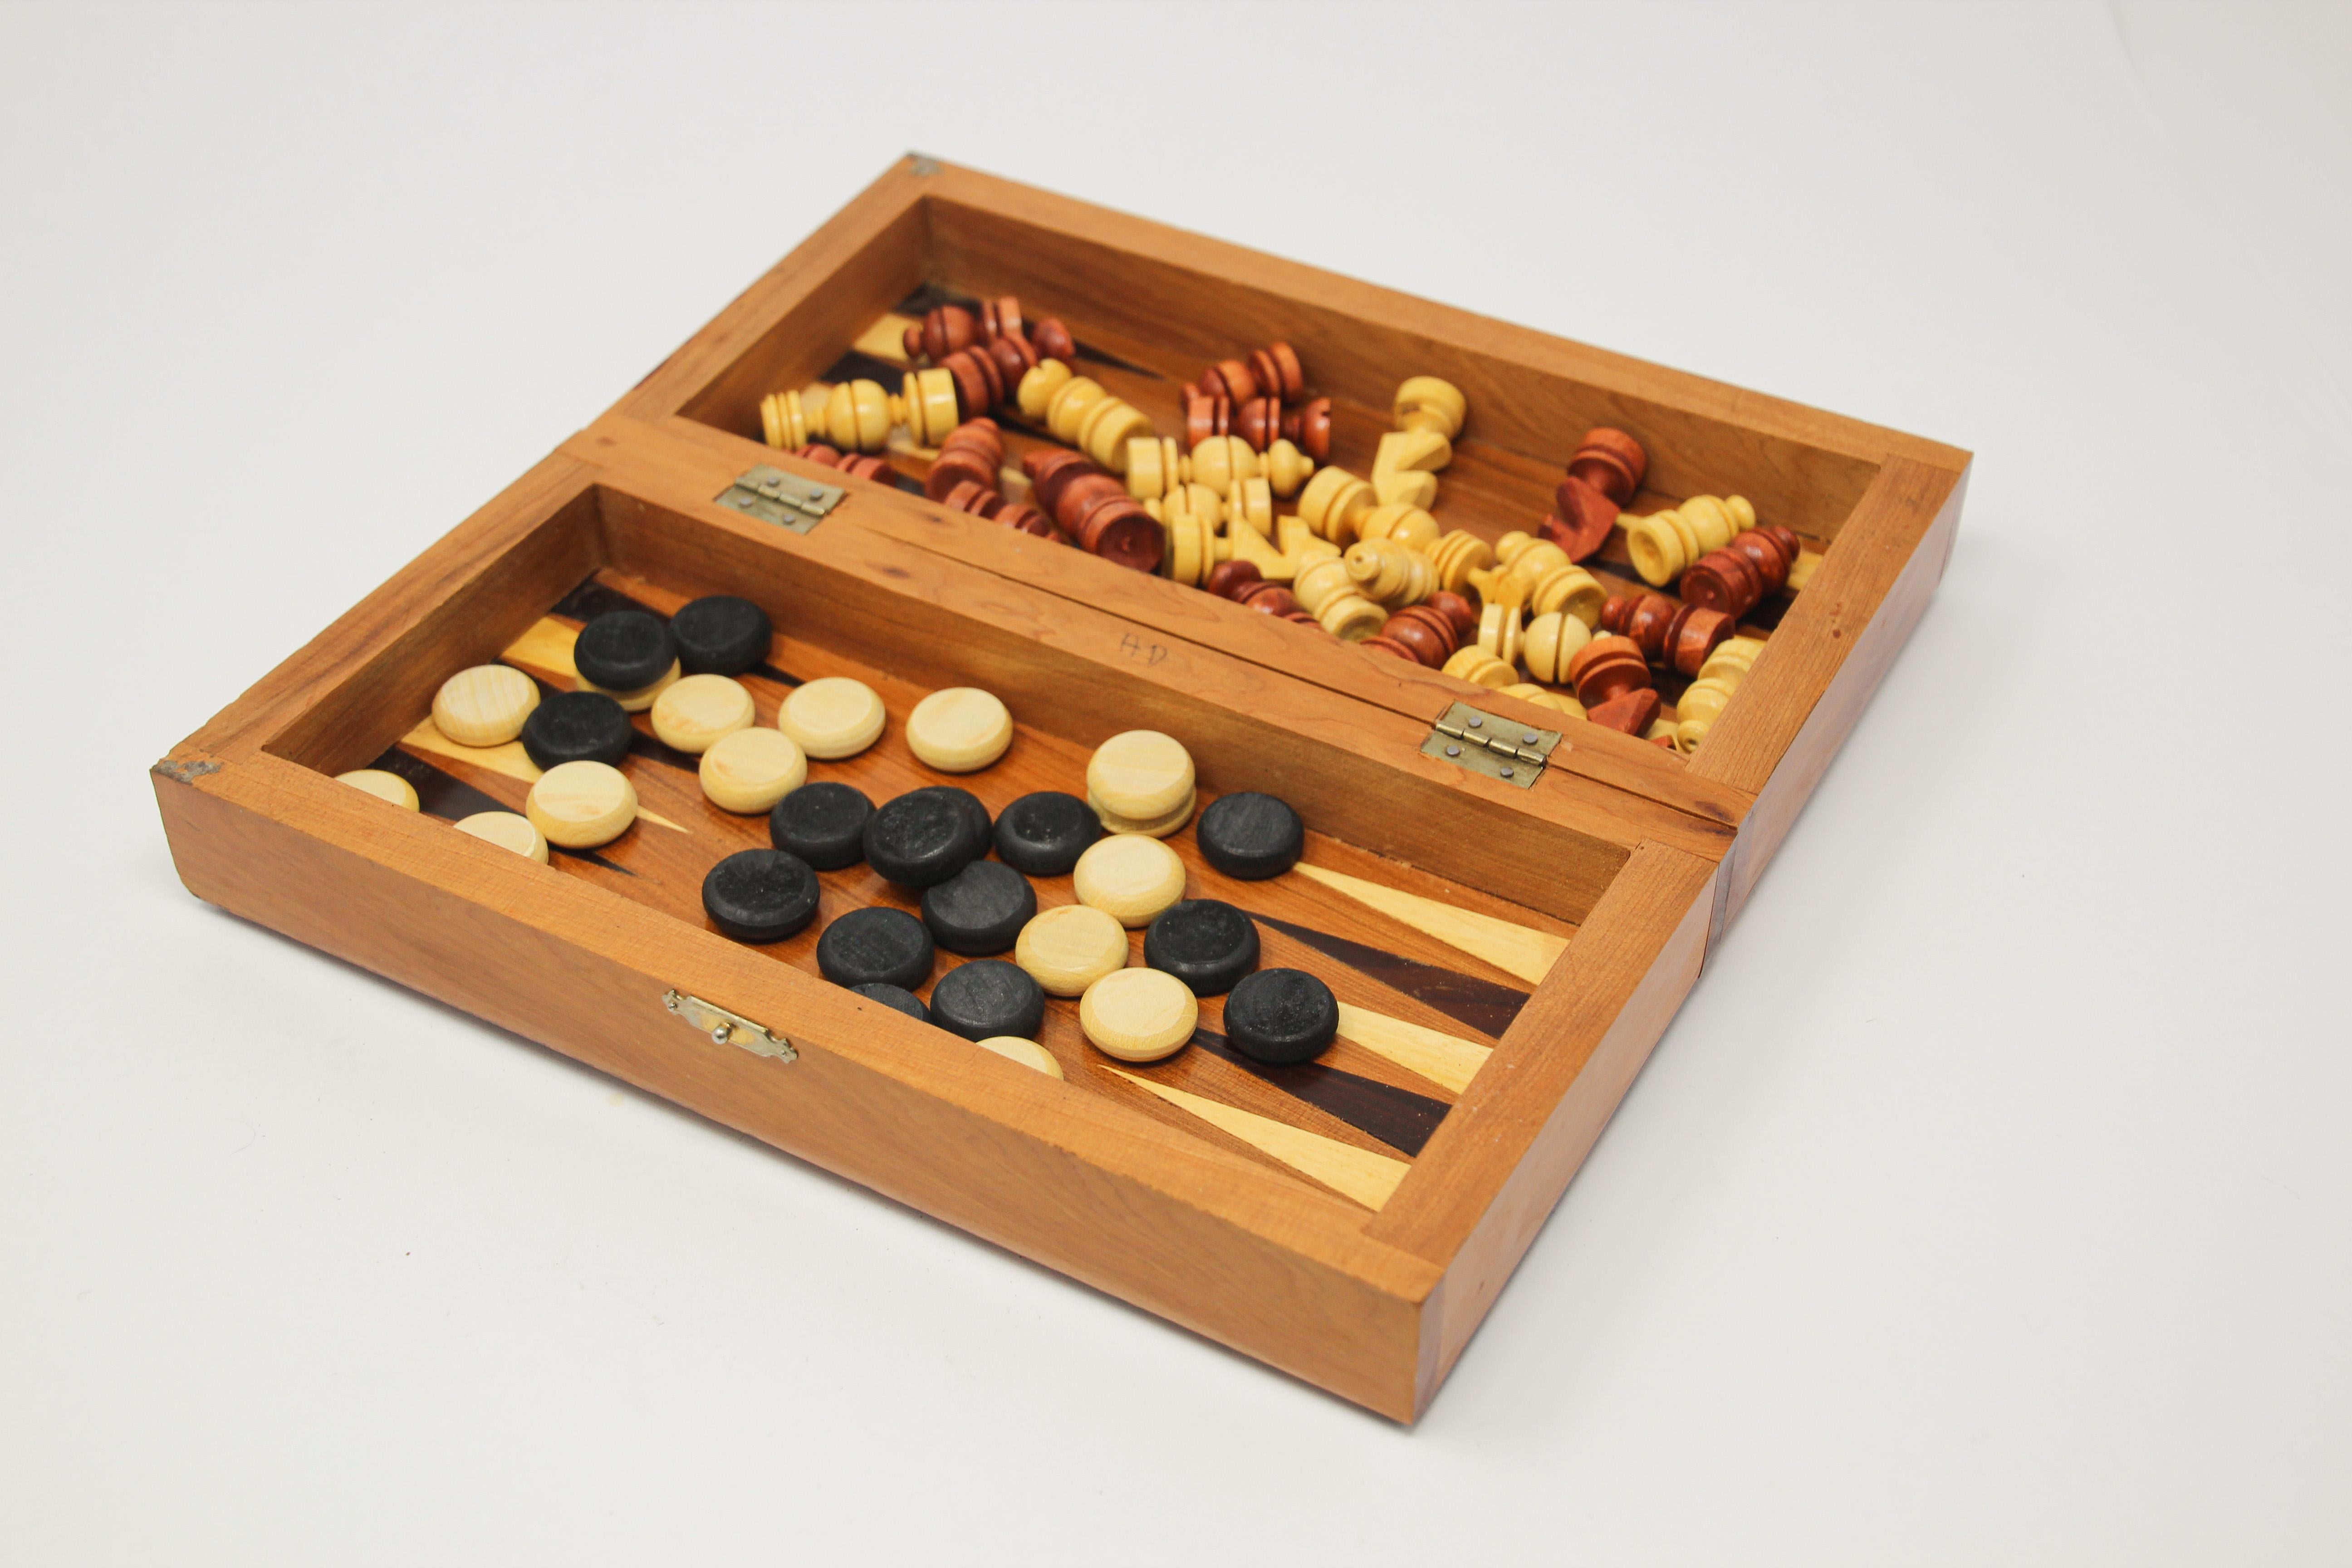 Decorative Moroccan handcrafted Thuya wood box with backgammon and chess set game.
Morrocan artists continue the long tradition that creating beautiful and functional pieces from roots and branches of the rare Thuya tree. This wood can be found